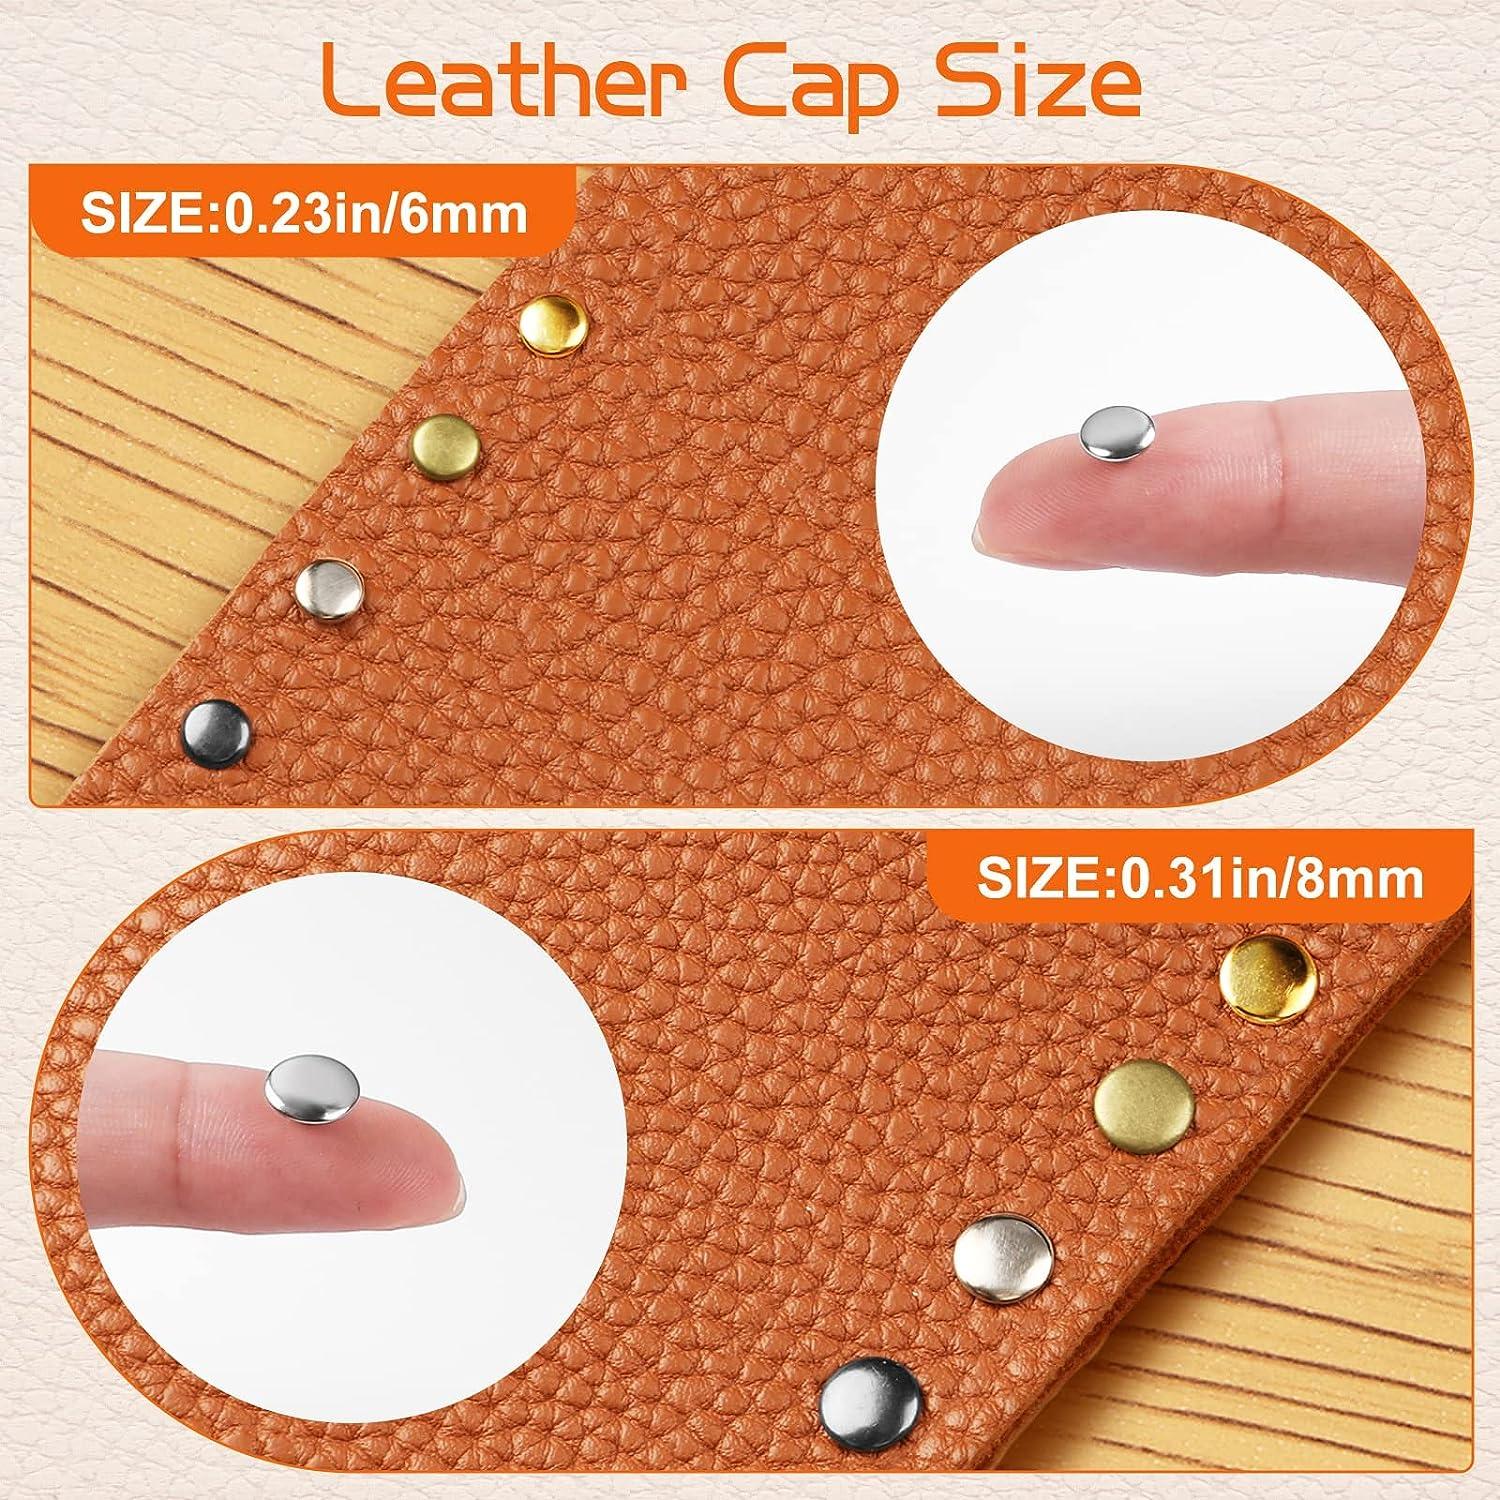 240 Set Leather Rivets Double Cap Rivet Tubular Metal Studs 2 Sizes with  Punch Pliers for Leather Craft Repairs Decoration - AliExpress